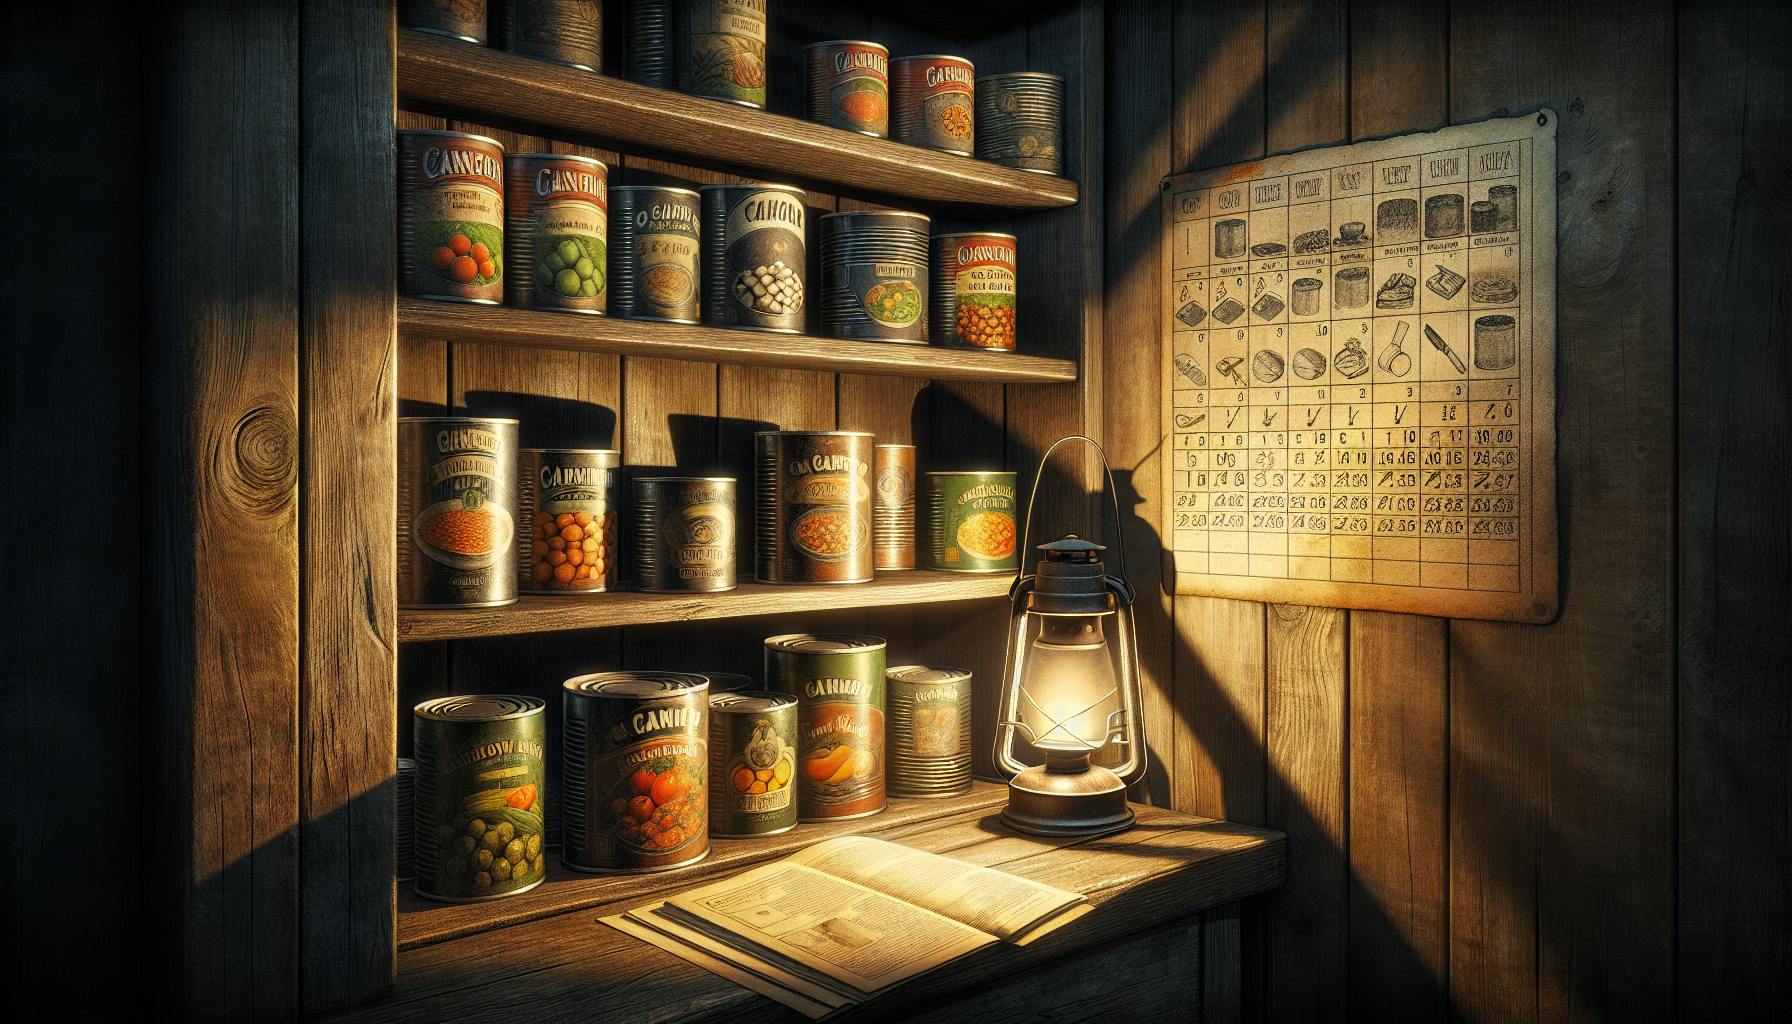 Canned Goods with the Longest Shelf Life Unveiled